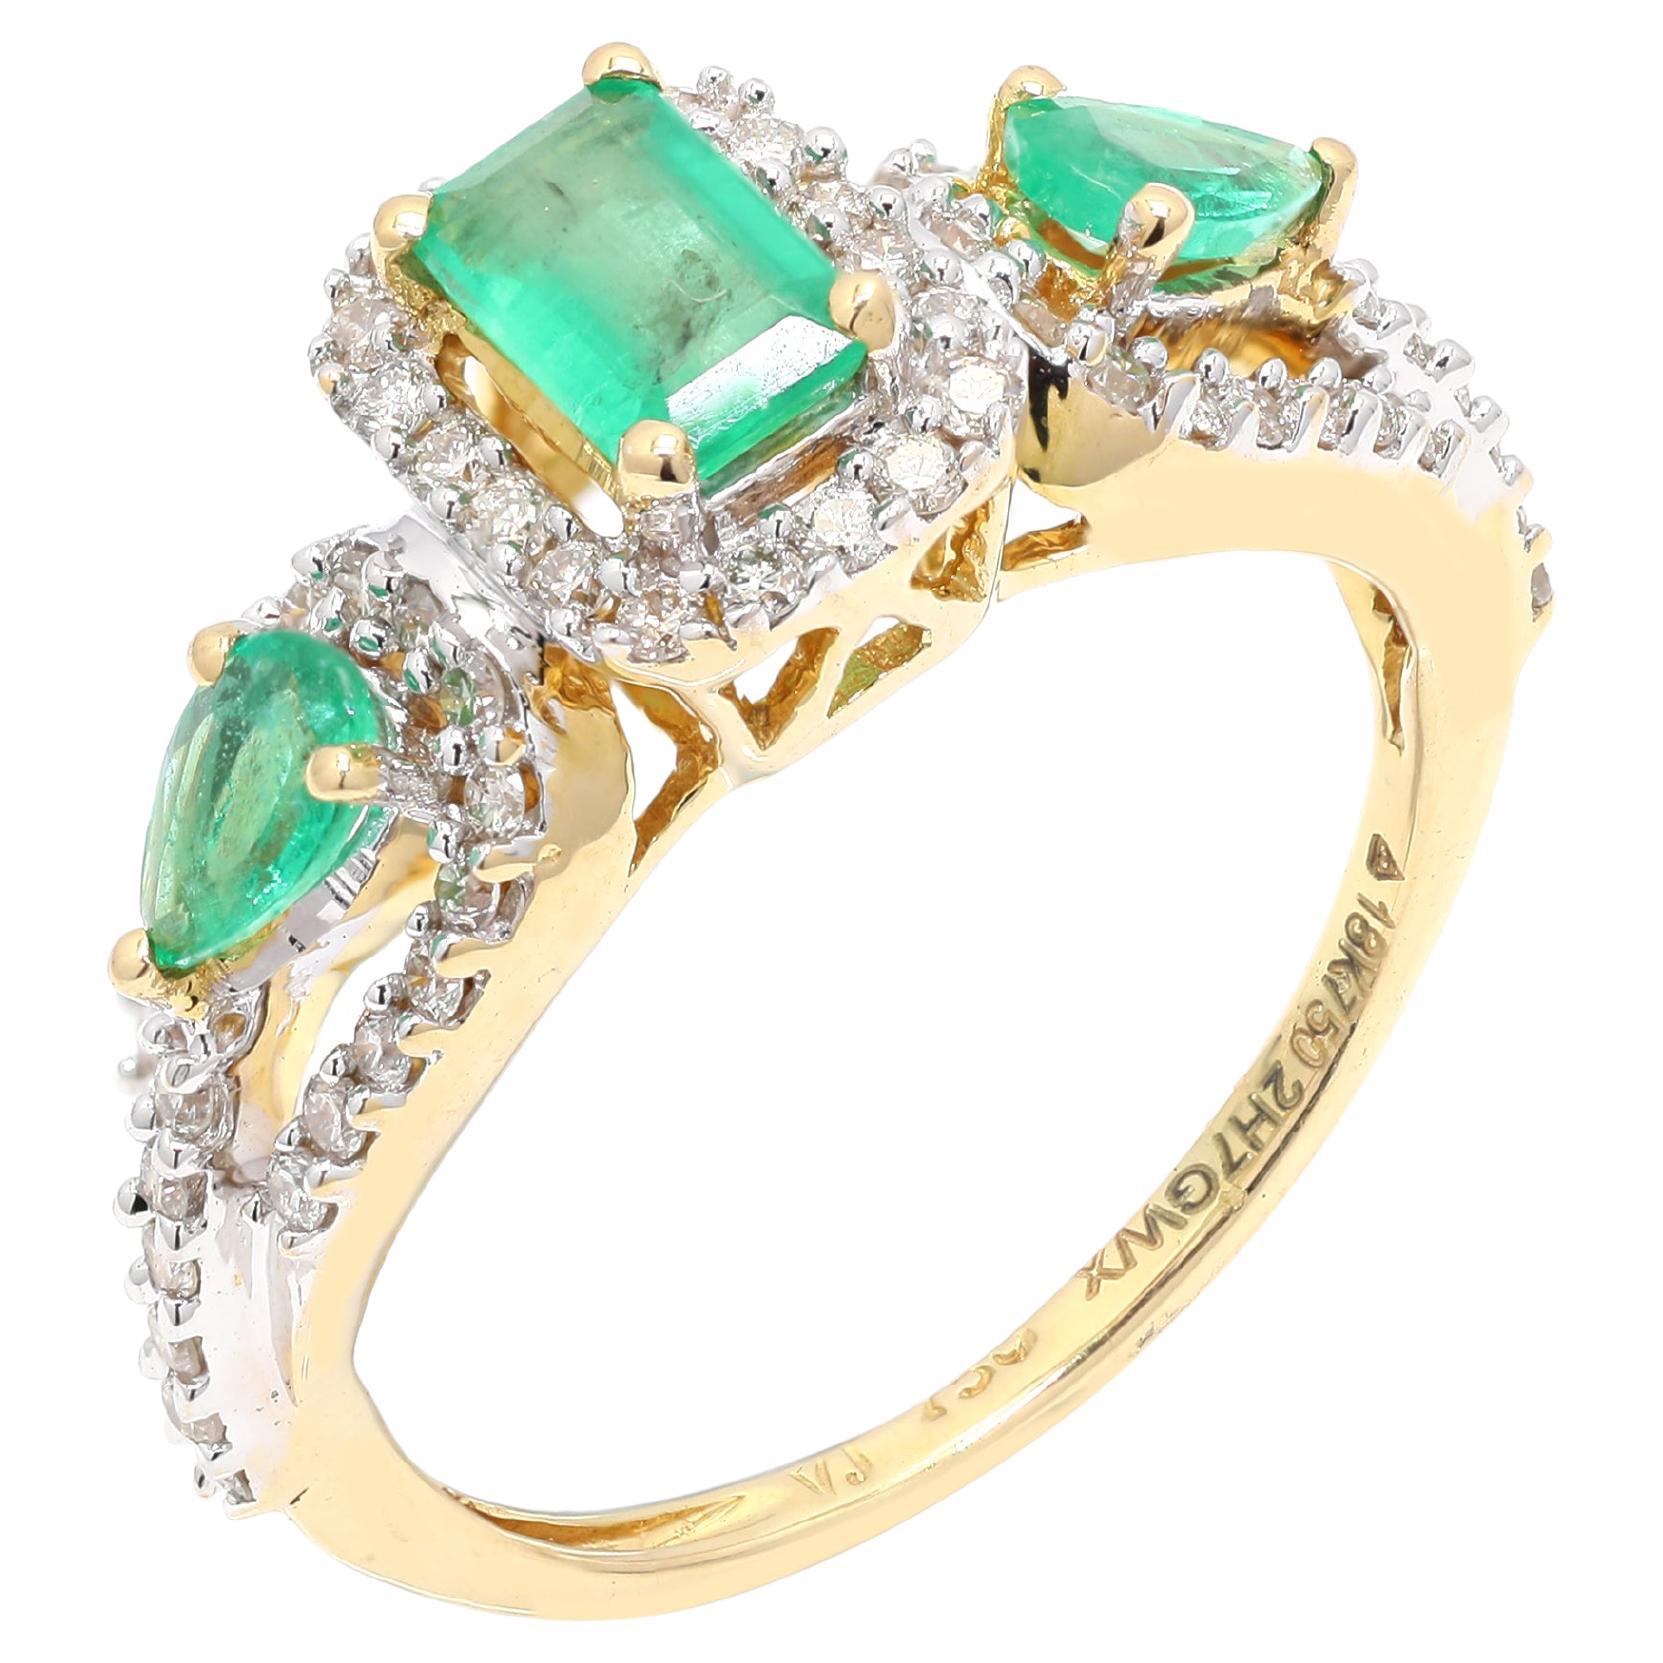 For Sale:  Three Stone Natural Diamond Emerald Engagement Ring in Solid 18K Yellow Gold